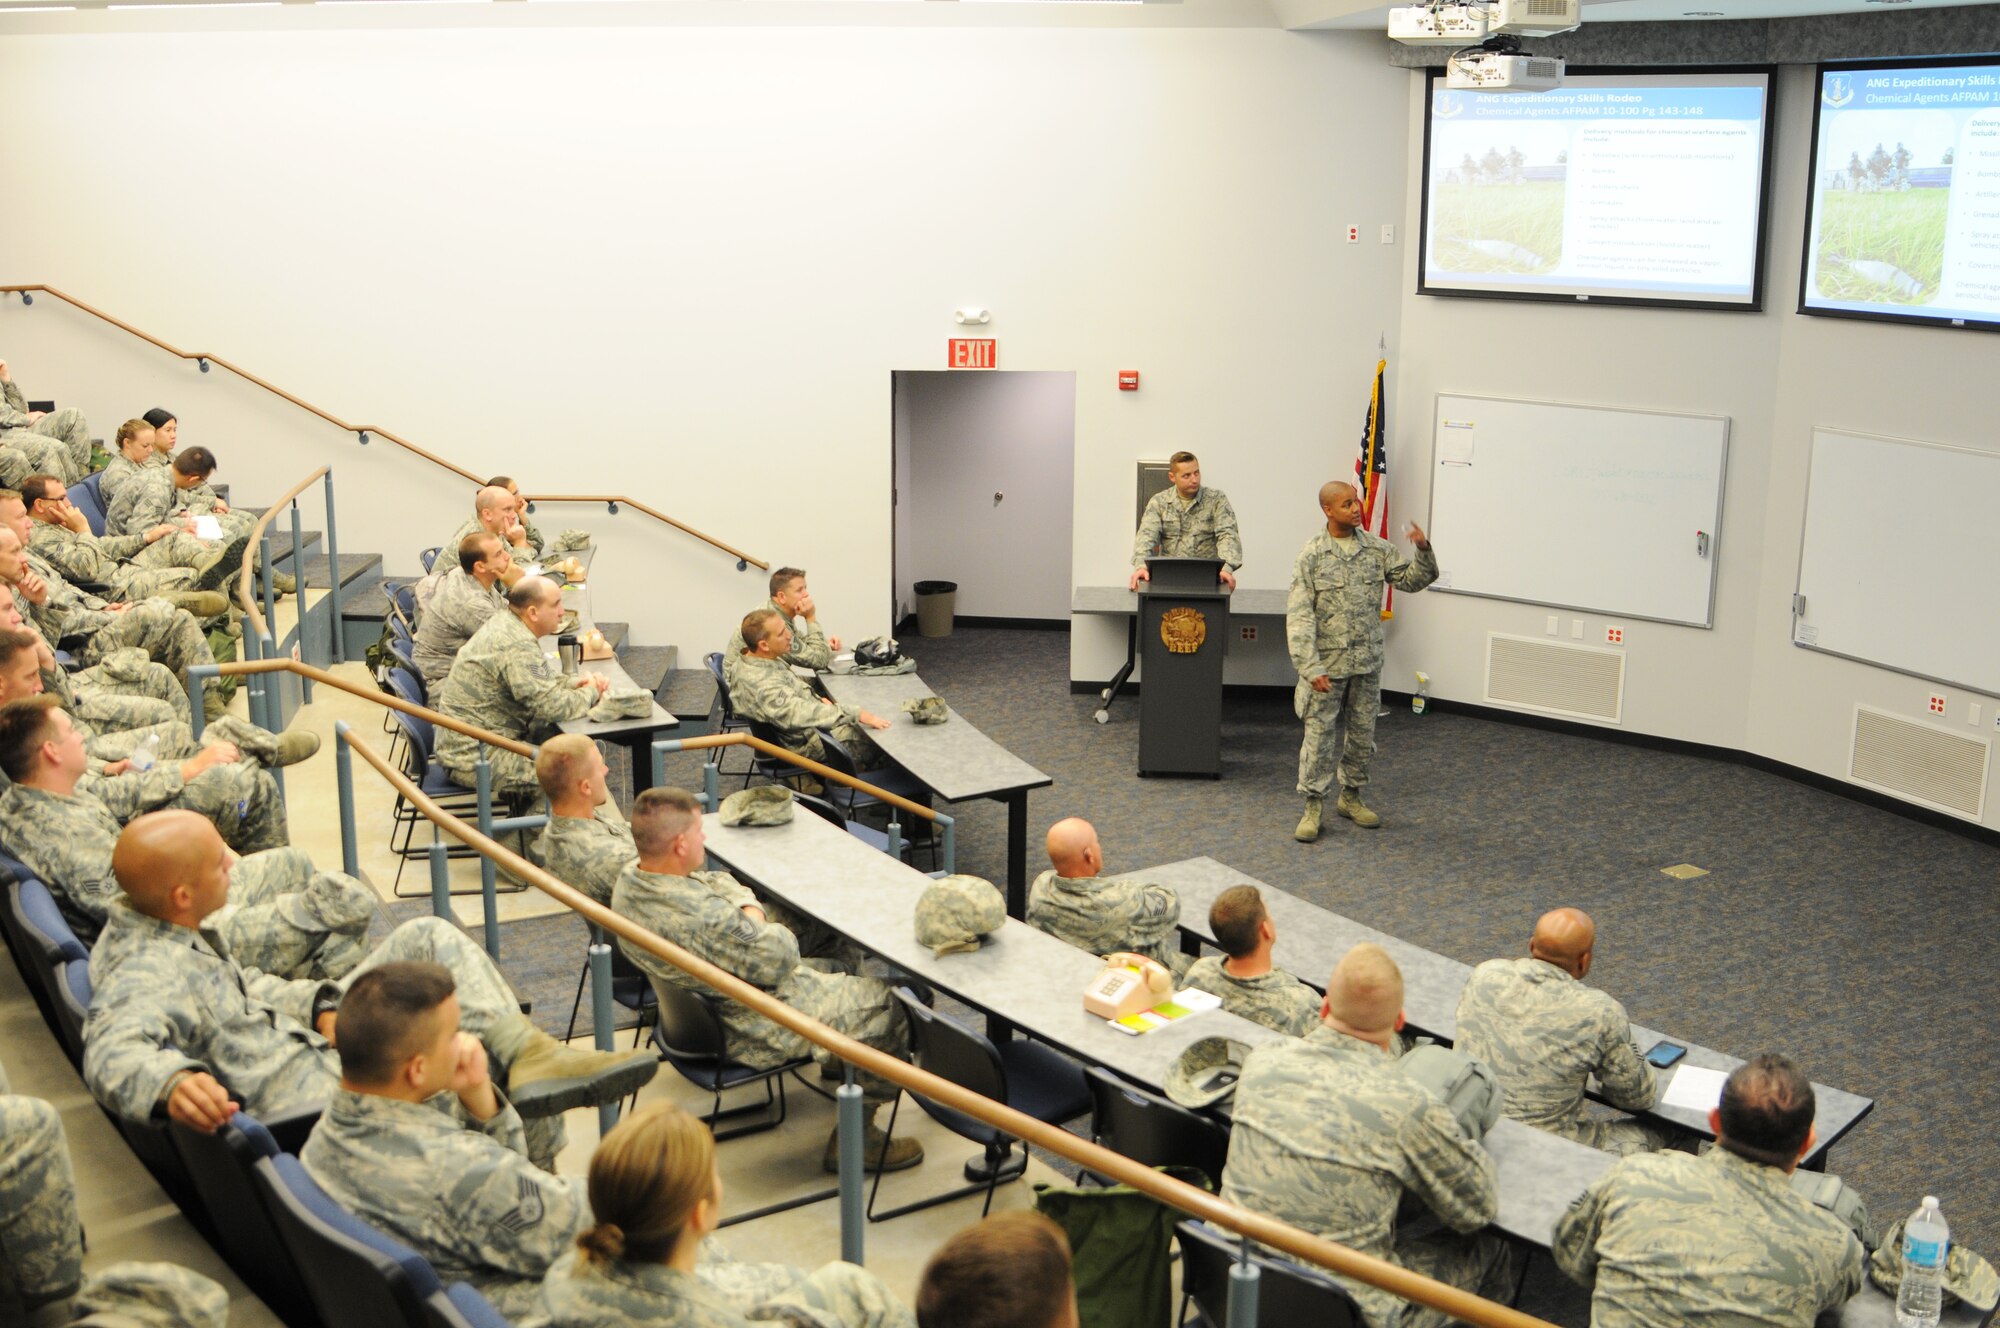 Senior Airman Keenan Wallace, 188th Civil Engineer Squadron emergency manager, and Senior Airman James McFerron, 188th CES emergency manager, instruct Expeditionary Skills Rodeo trainees Sept. 20, 2015, on the importance of chemical, biological, radiological and nuclear safety at Ebbing Air National Guard Base, Fort Smith, Ark. The ESR is a course designed to instruct Airmen on CBRN safety and self-aid buddy care techniques. (U.S. Air National Guard photo by Senior Airman Cody Martin/Released)